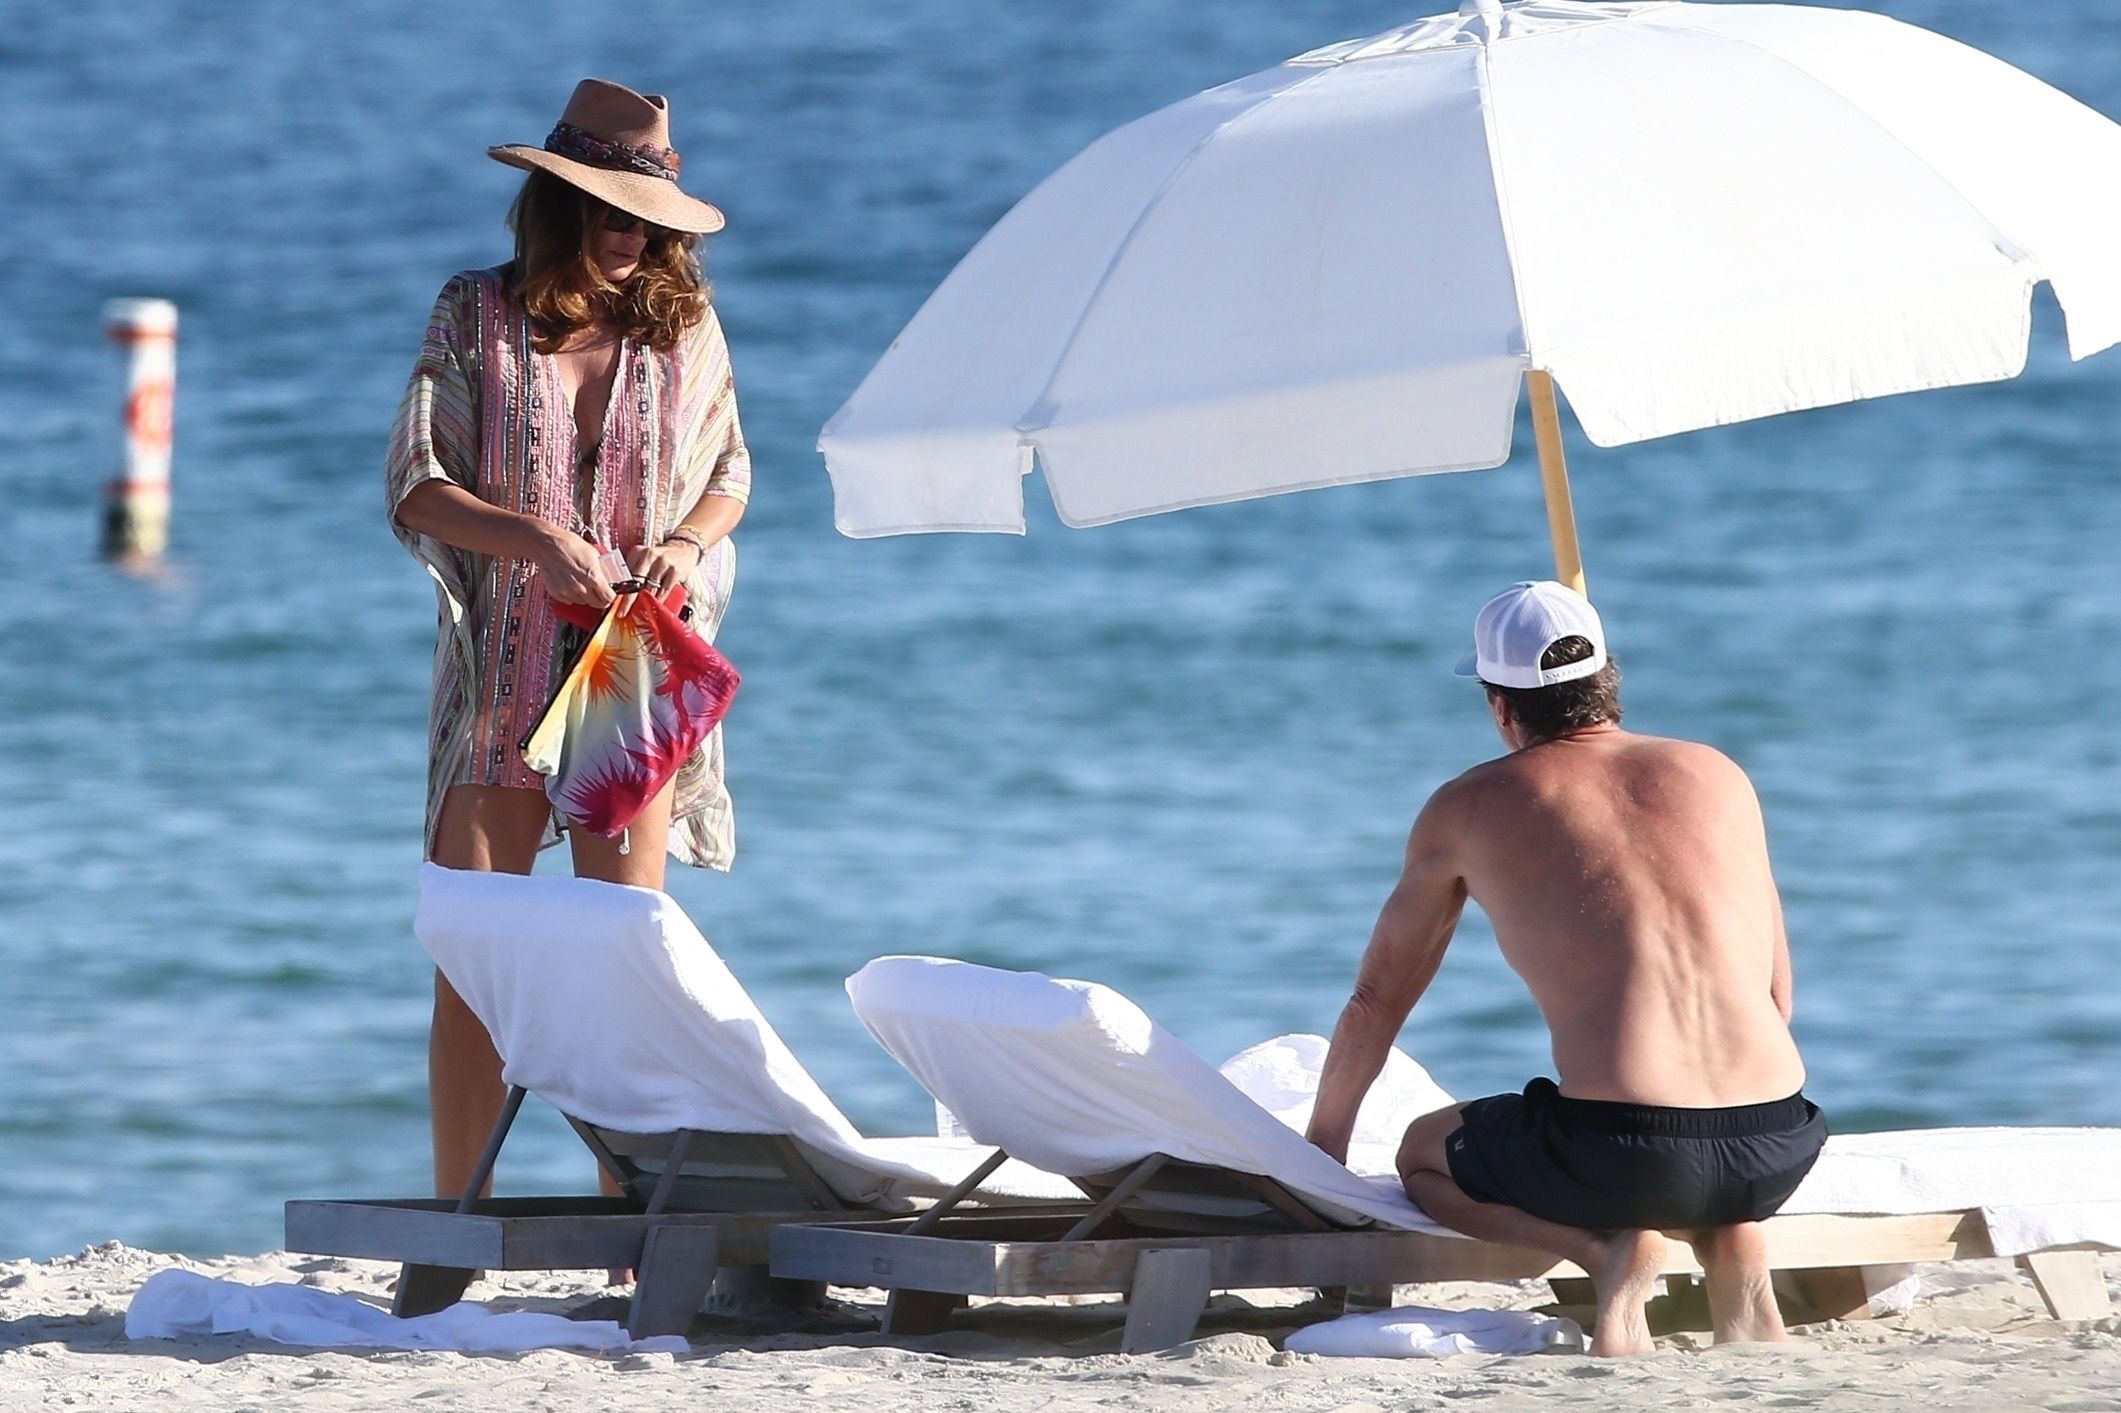 *PREMIUM EXCLUSIVE* Cindy Crawford and husband, Rande Gerber look relaxed as they hit the beach on New Year's Day in Miami. Supermodel Cindy, 53, looked stunning with a shawl over a green bikini, topping off her chic look with a straw fedora.
01 Jan 2020, Image: 490681548, License: Rights-managed, Restrictions: World Rights, Model Release: no, Credit line: BackGrid/MEGA / Mega Agency / Profimedia